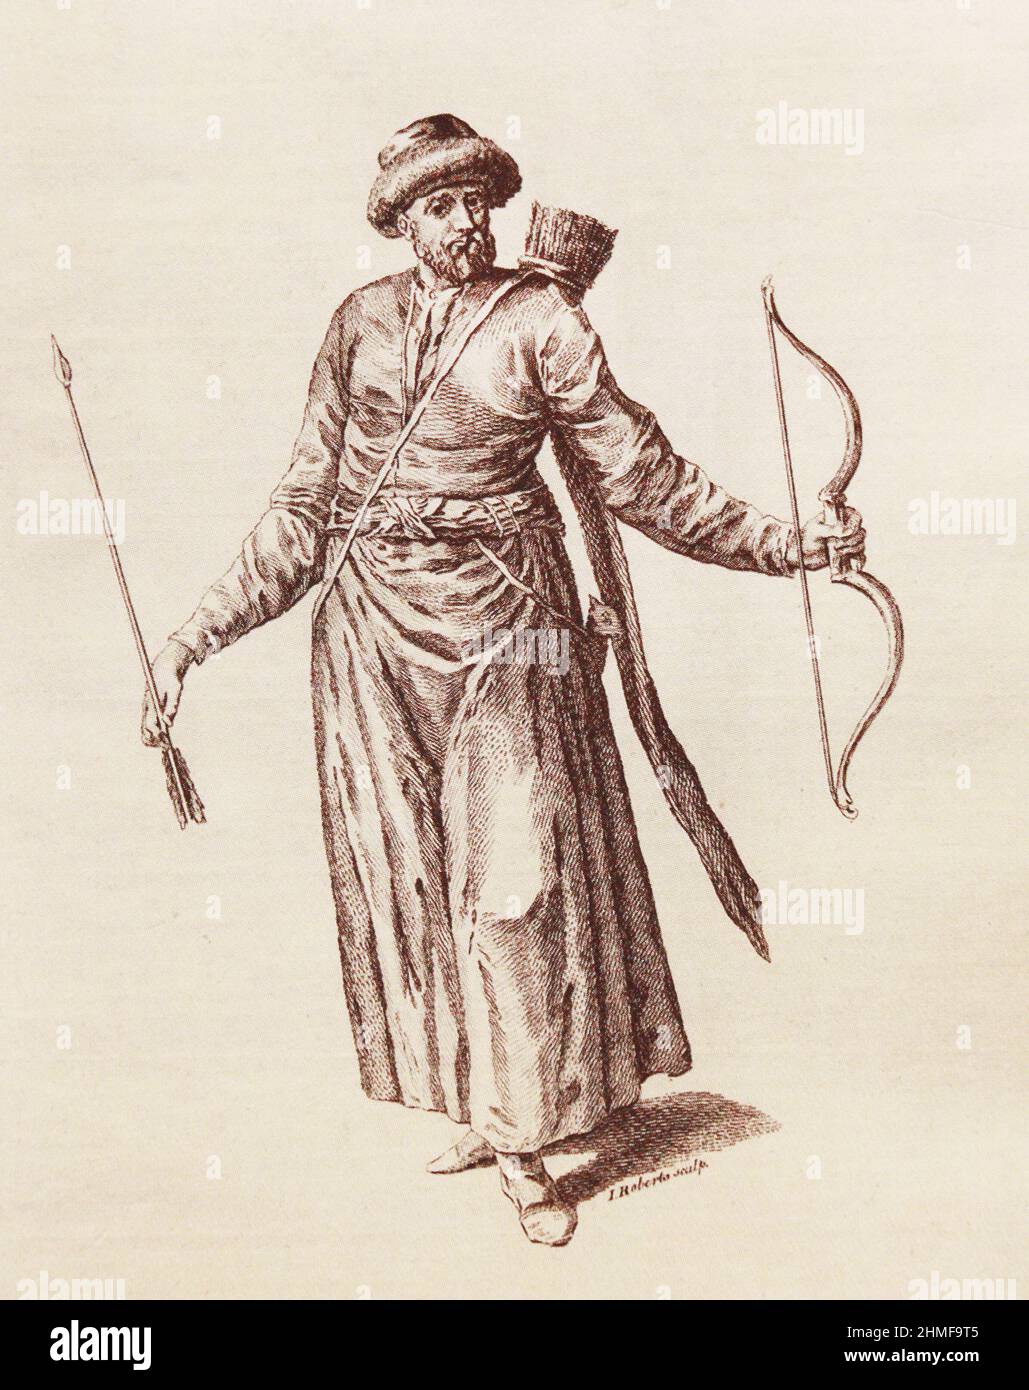 Crimean Tatar. Engraving of the 18th century. Stock Photo